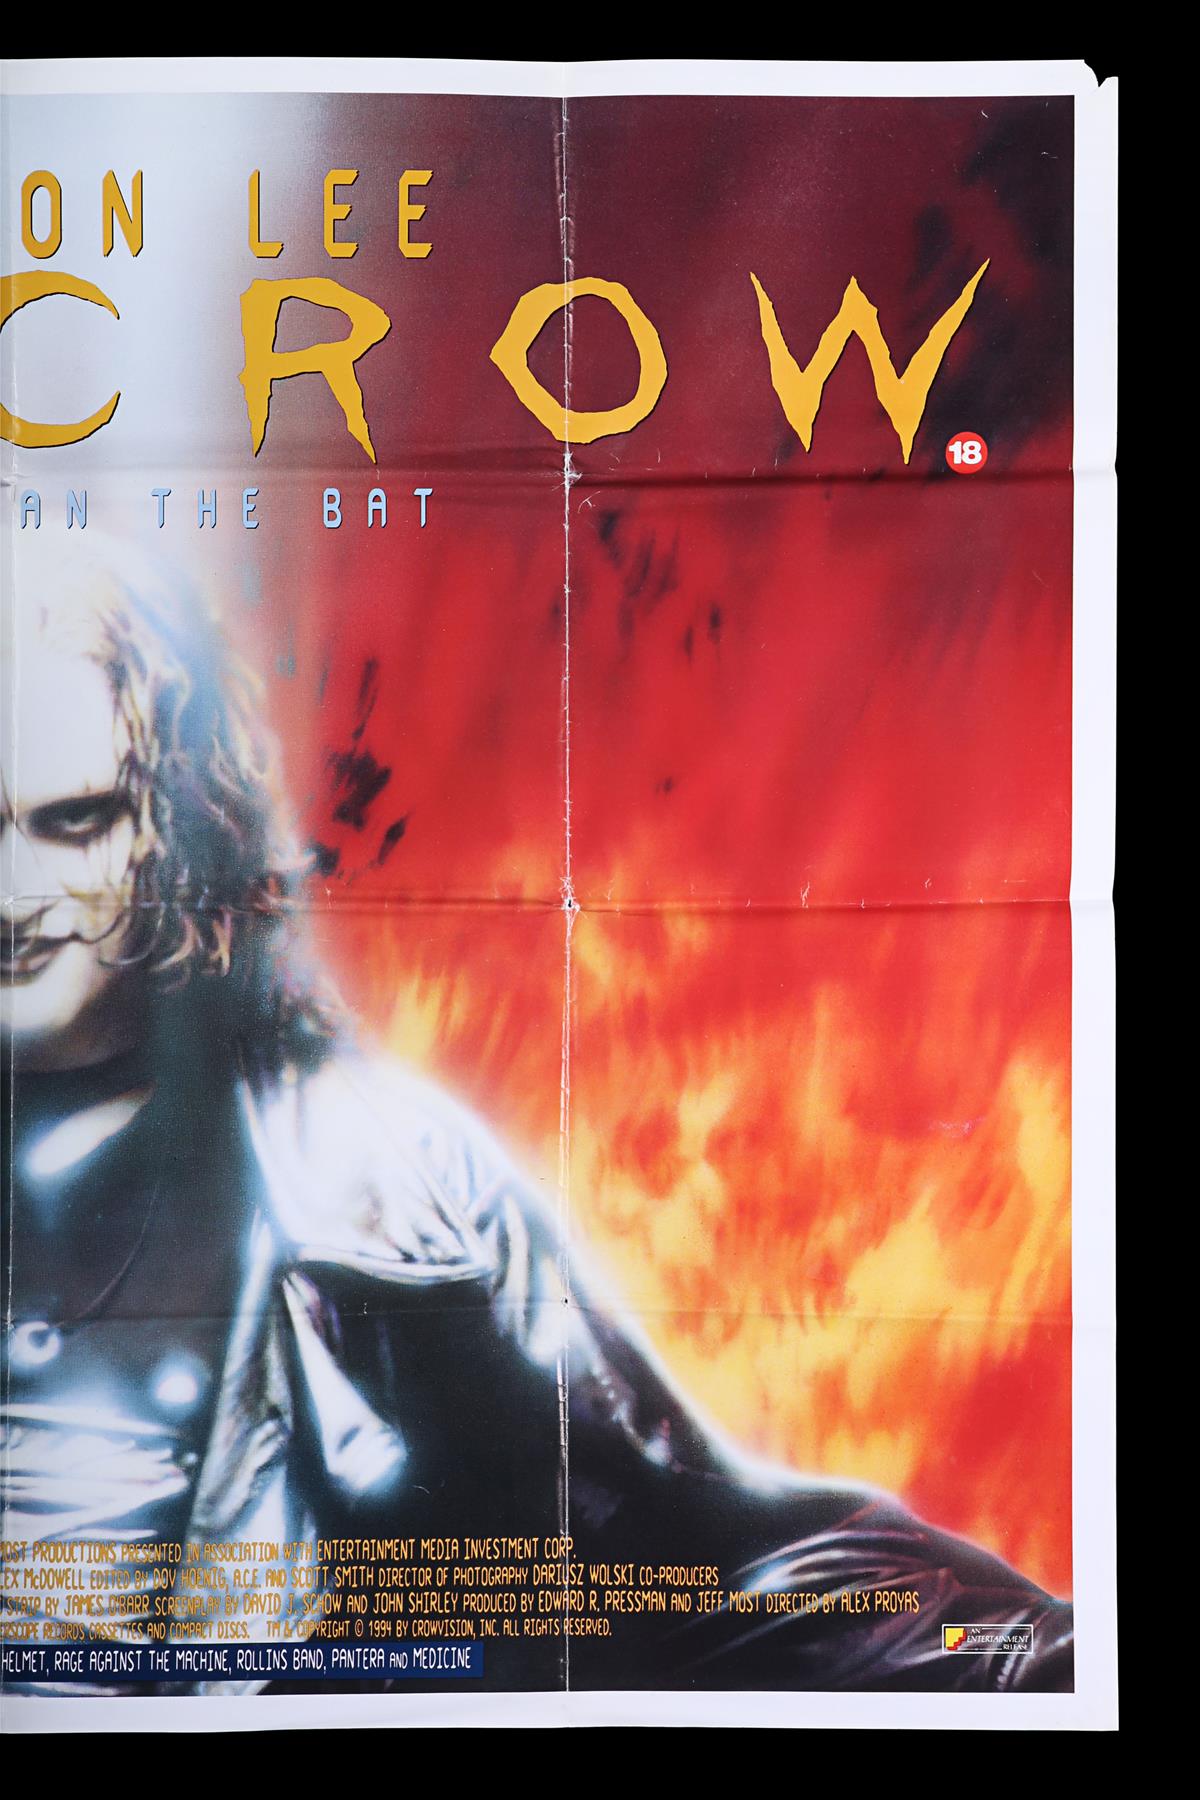 THE CROW (1994) - US One-Sheet and UK Quad, 1994 - Image 7 of 7